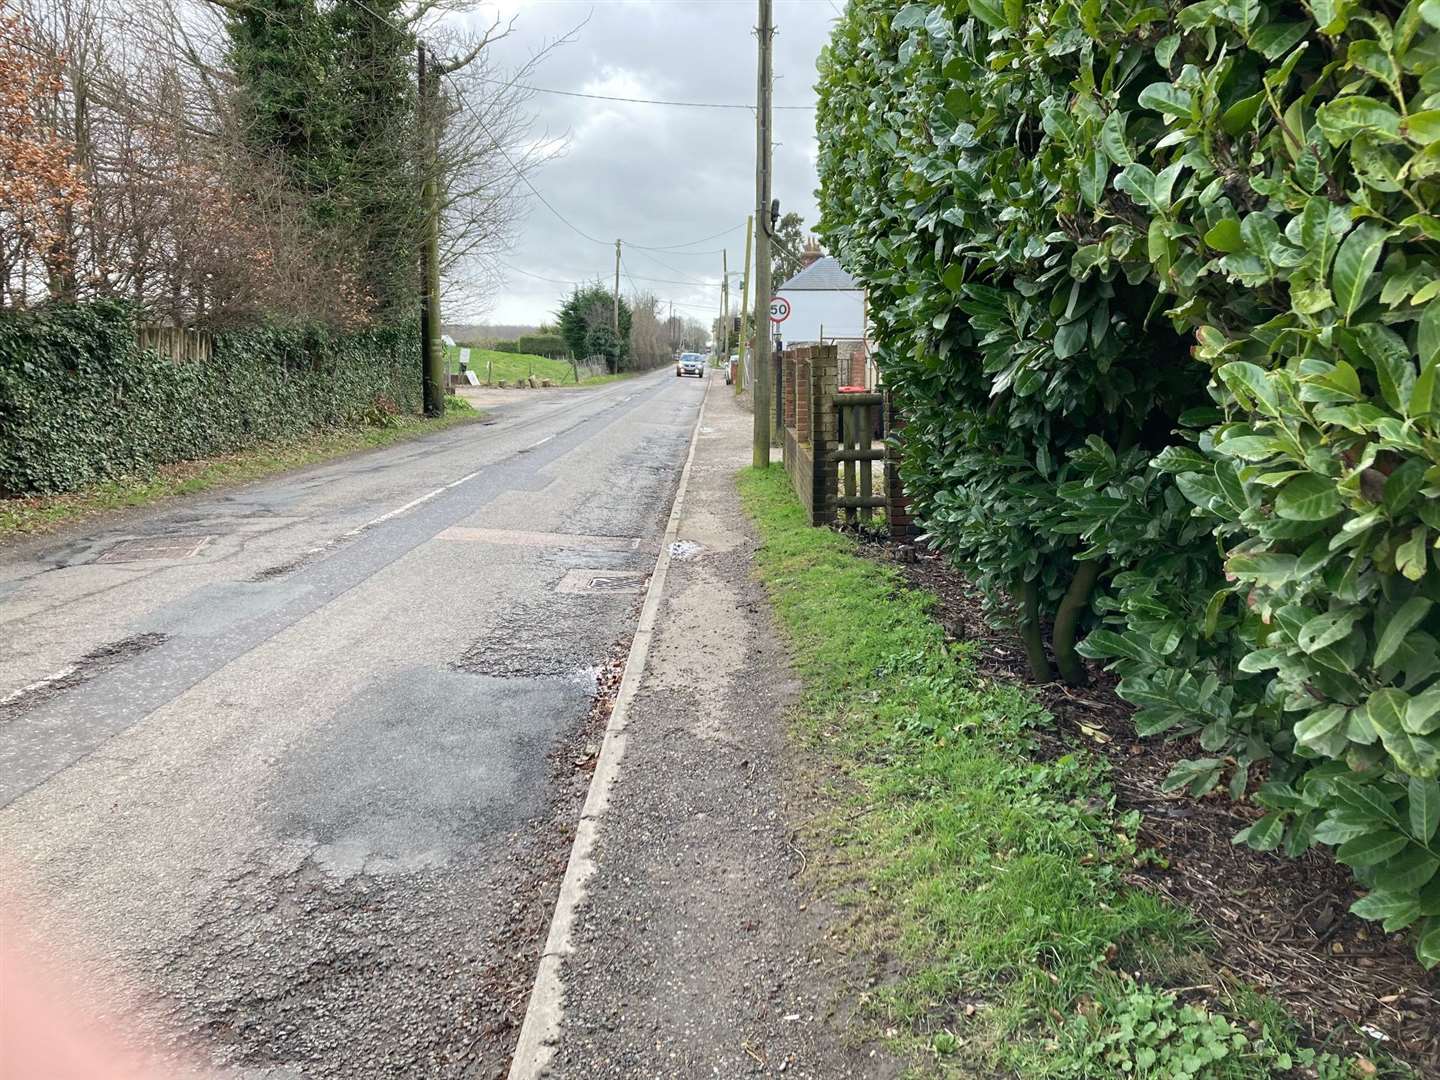 Stone Street in Petham near Canterbury has long had a reputation as being a dangerous route